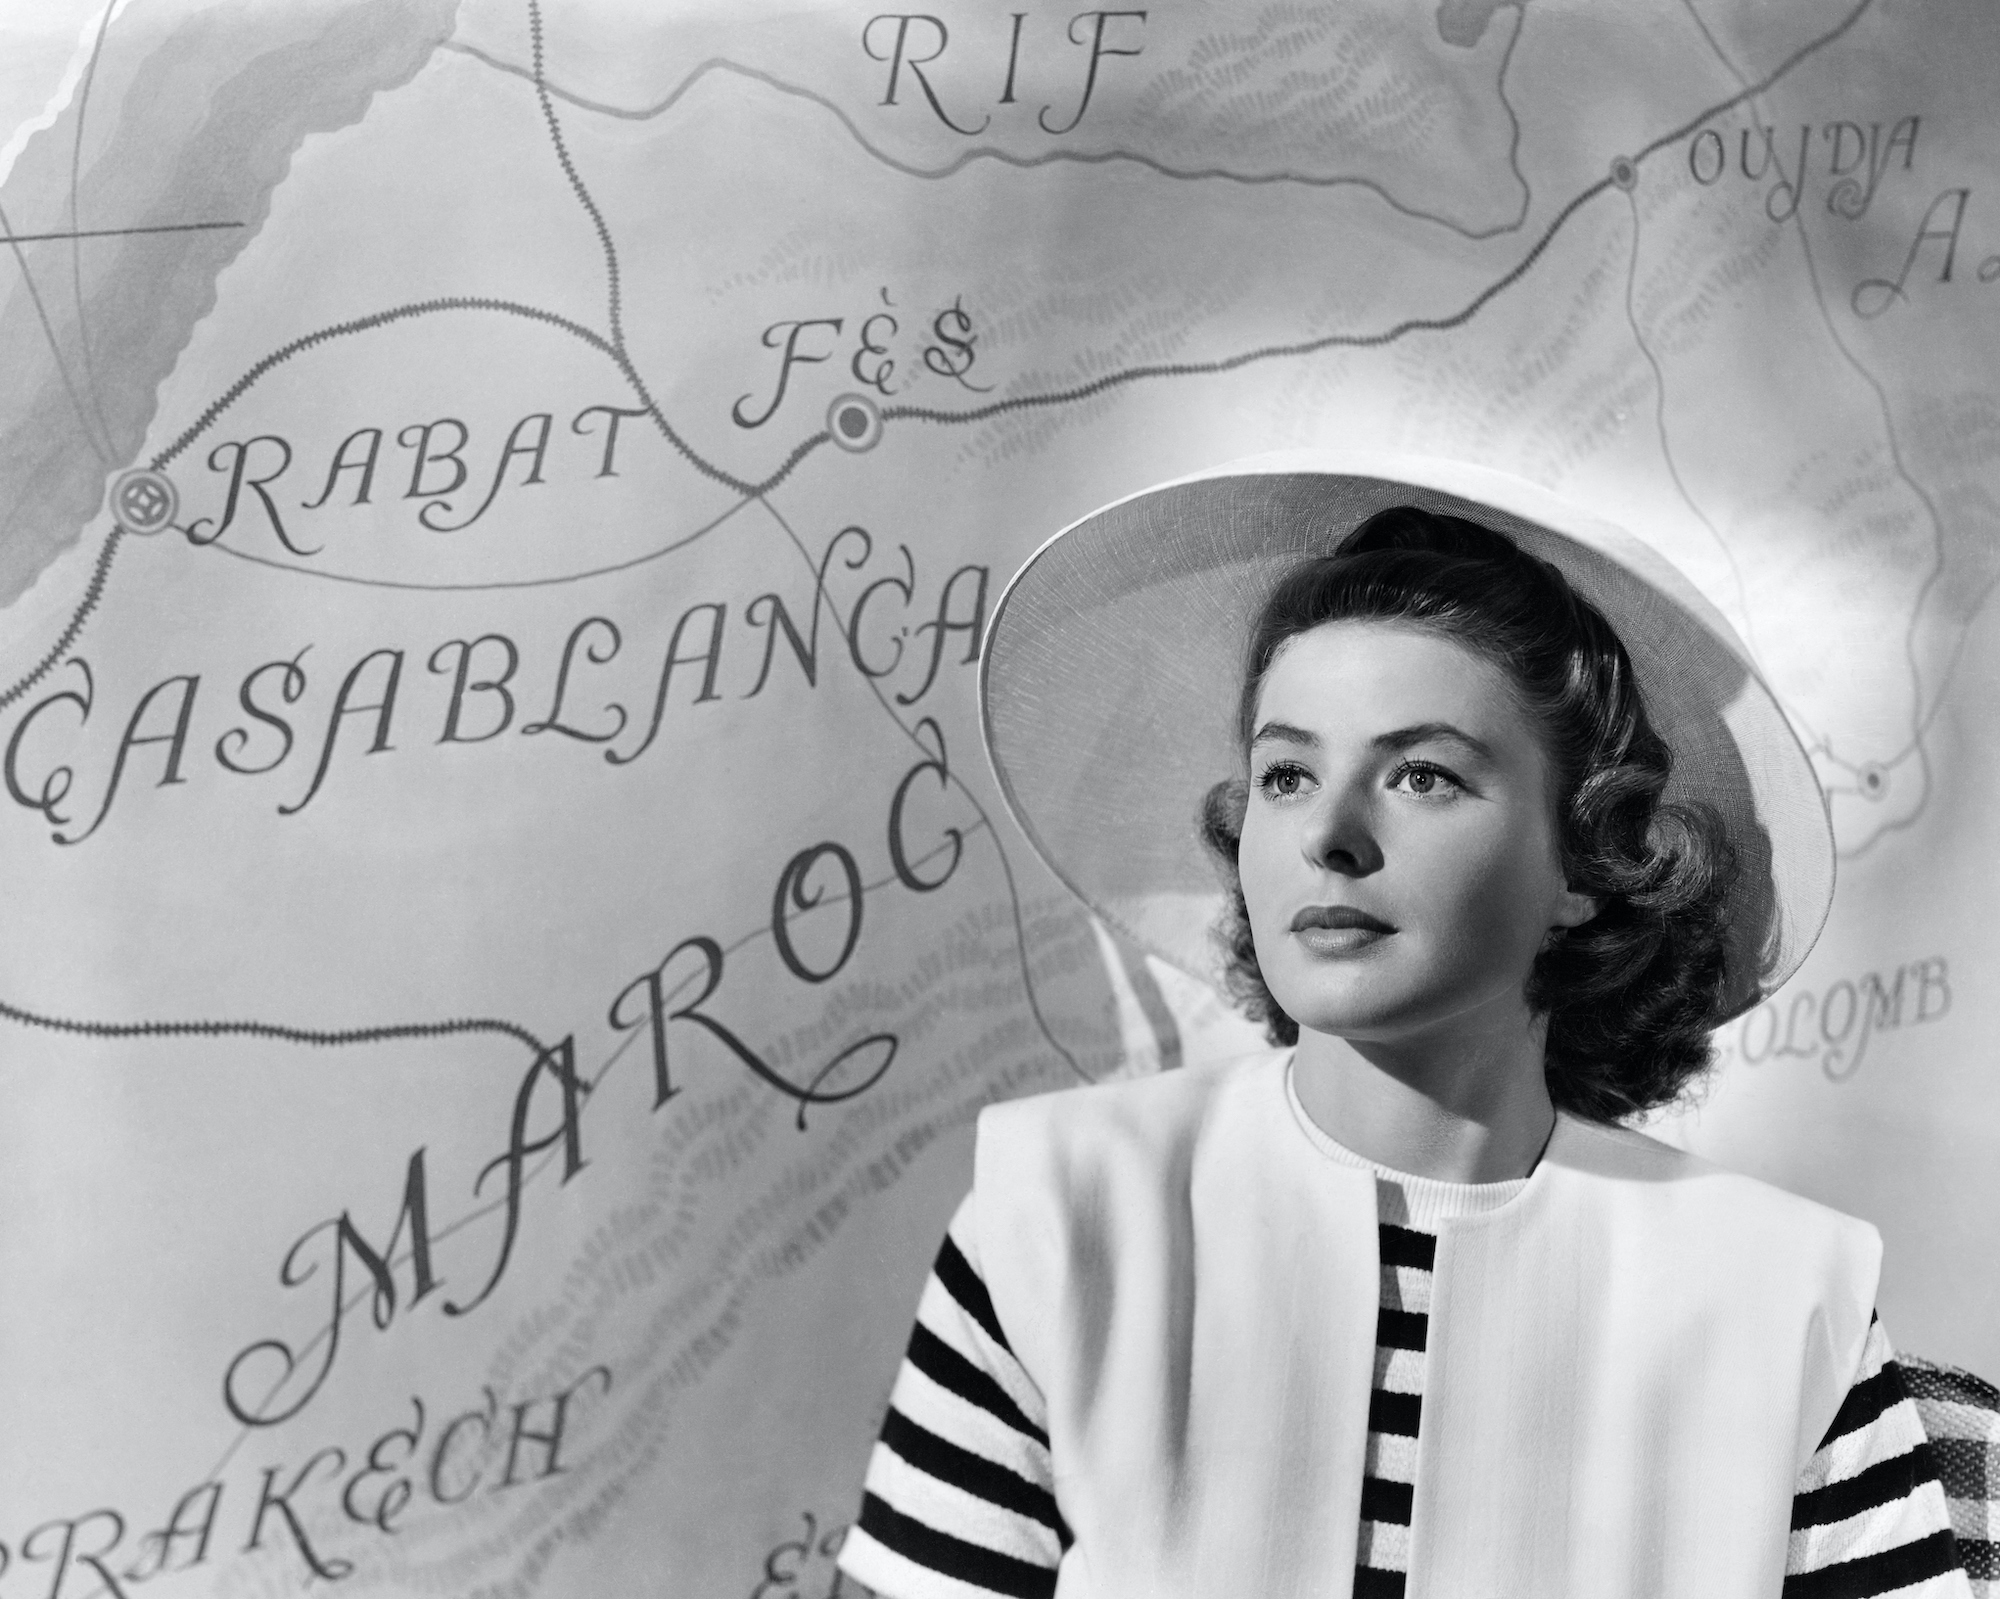 Ingrid Bergman in Casablanca, sitting in front of a map looking off camera, in black and white